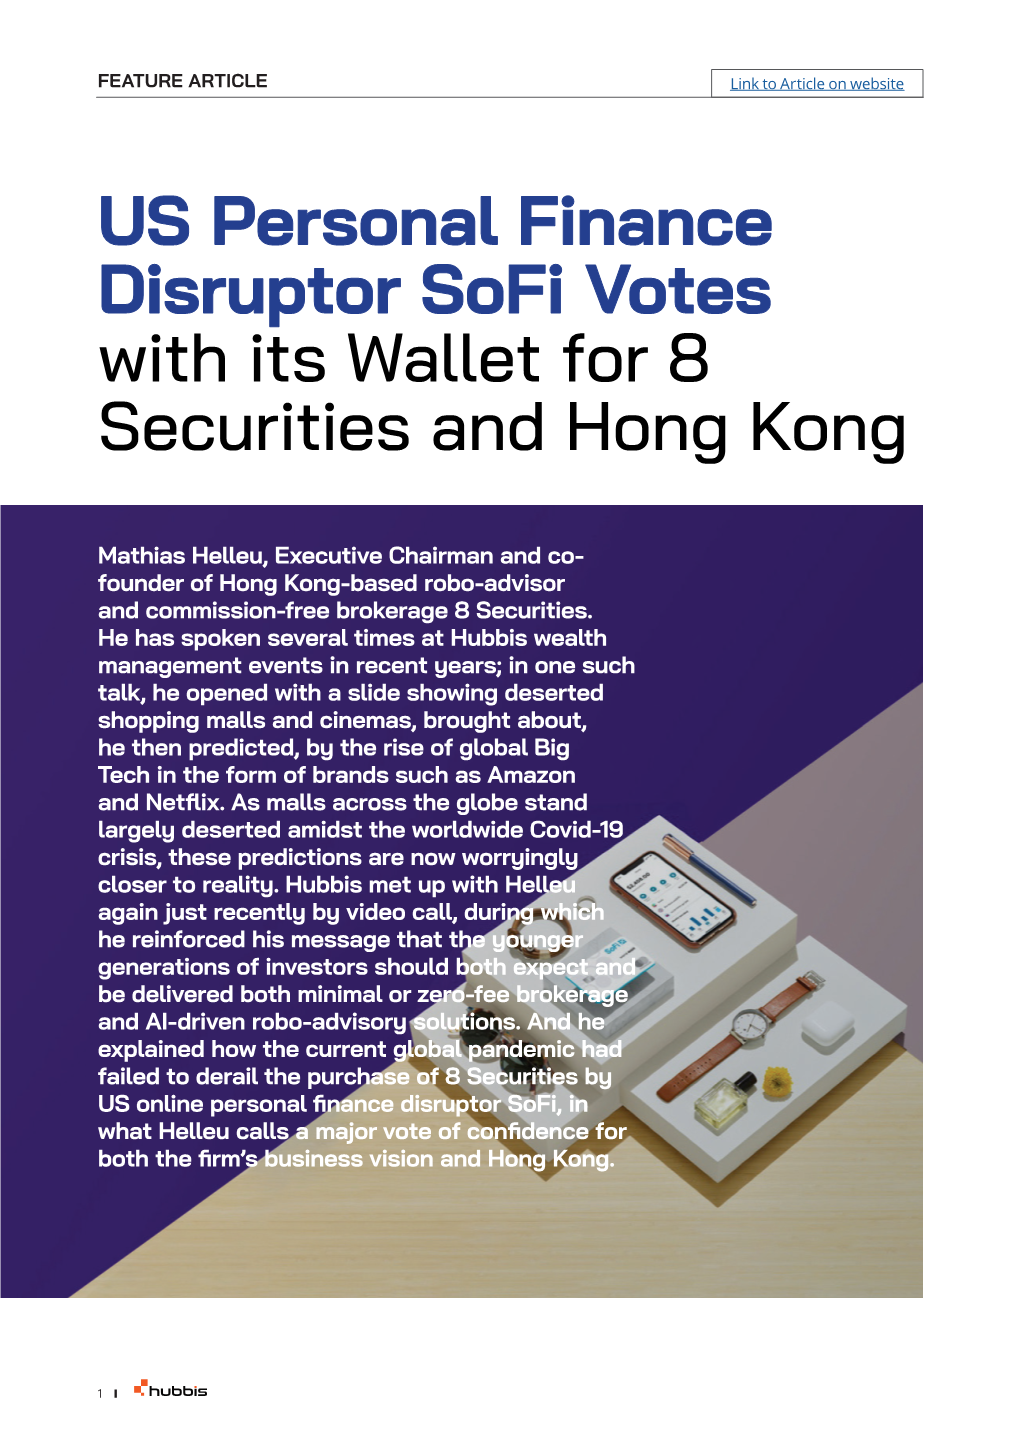 US Personal Finance Disruptor Sofi Votes with Its Wallet for 8 Securities and Hong Kong